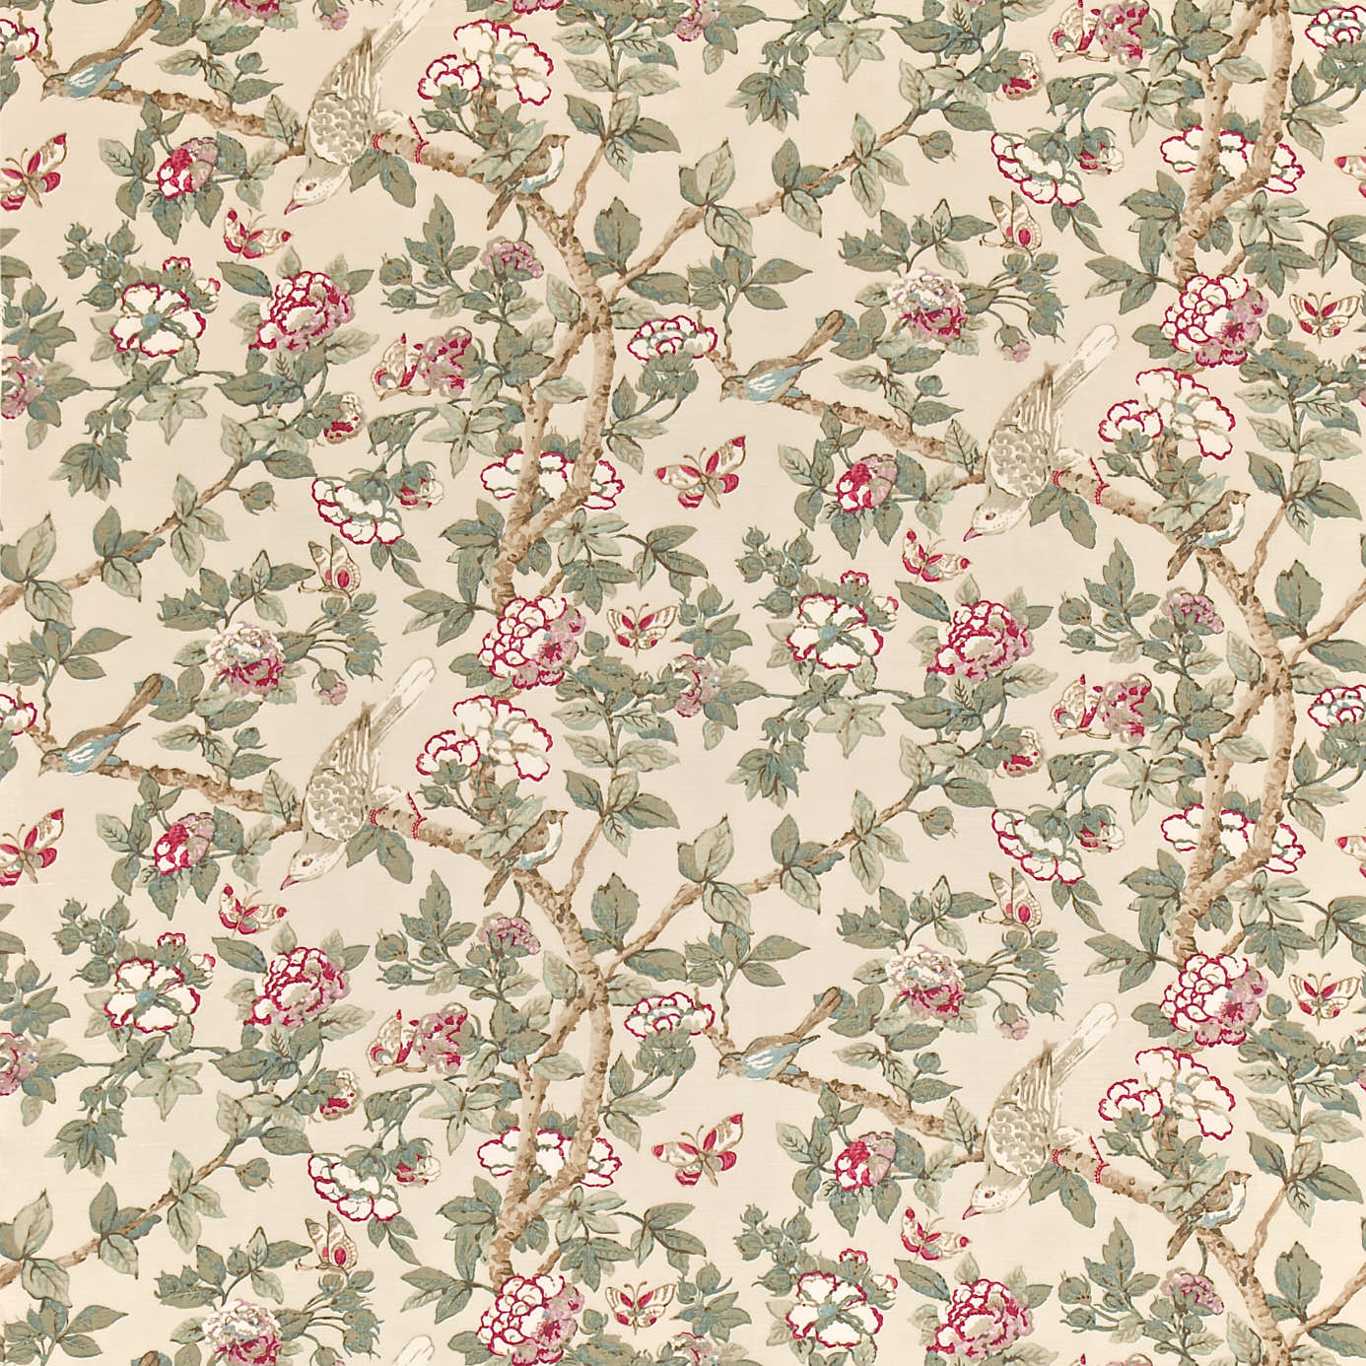 Caverley Fabric by Sanderson - DCAVCA201 - Rose/Pewter